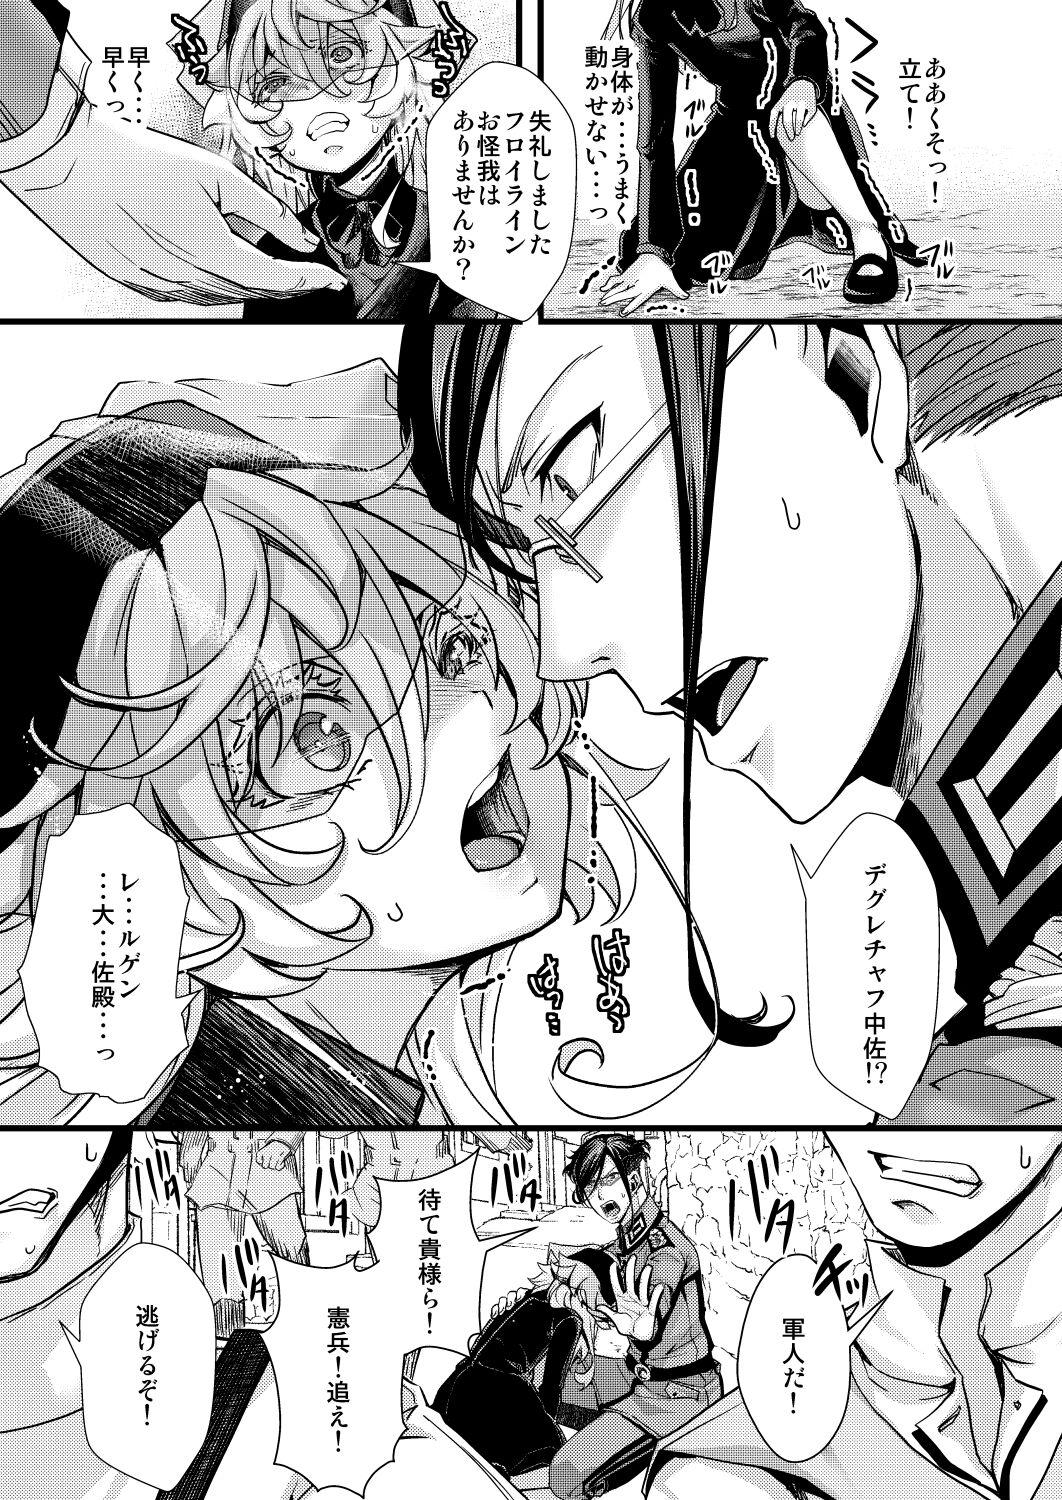 Wet Cunt Rugs - Youjo senki | saga of tanya the evil Gay Party - Page 7